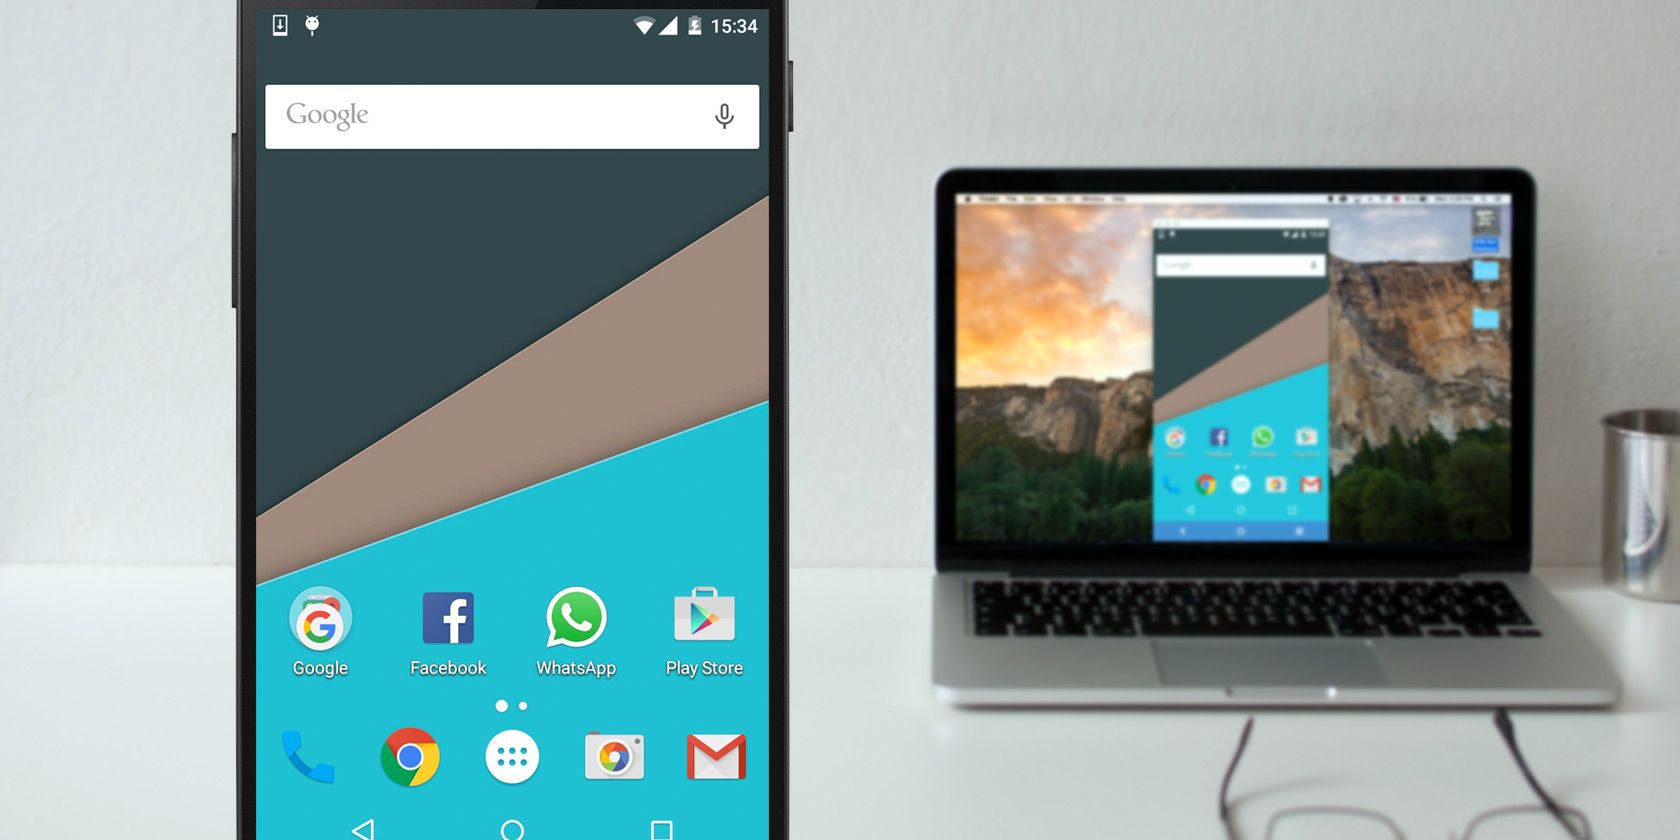 Mirror Your Android Screen To Pc Or Mac, How To Screen Mirror Phone Laptop Without Internet